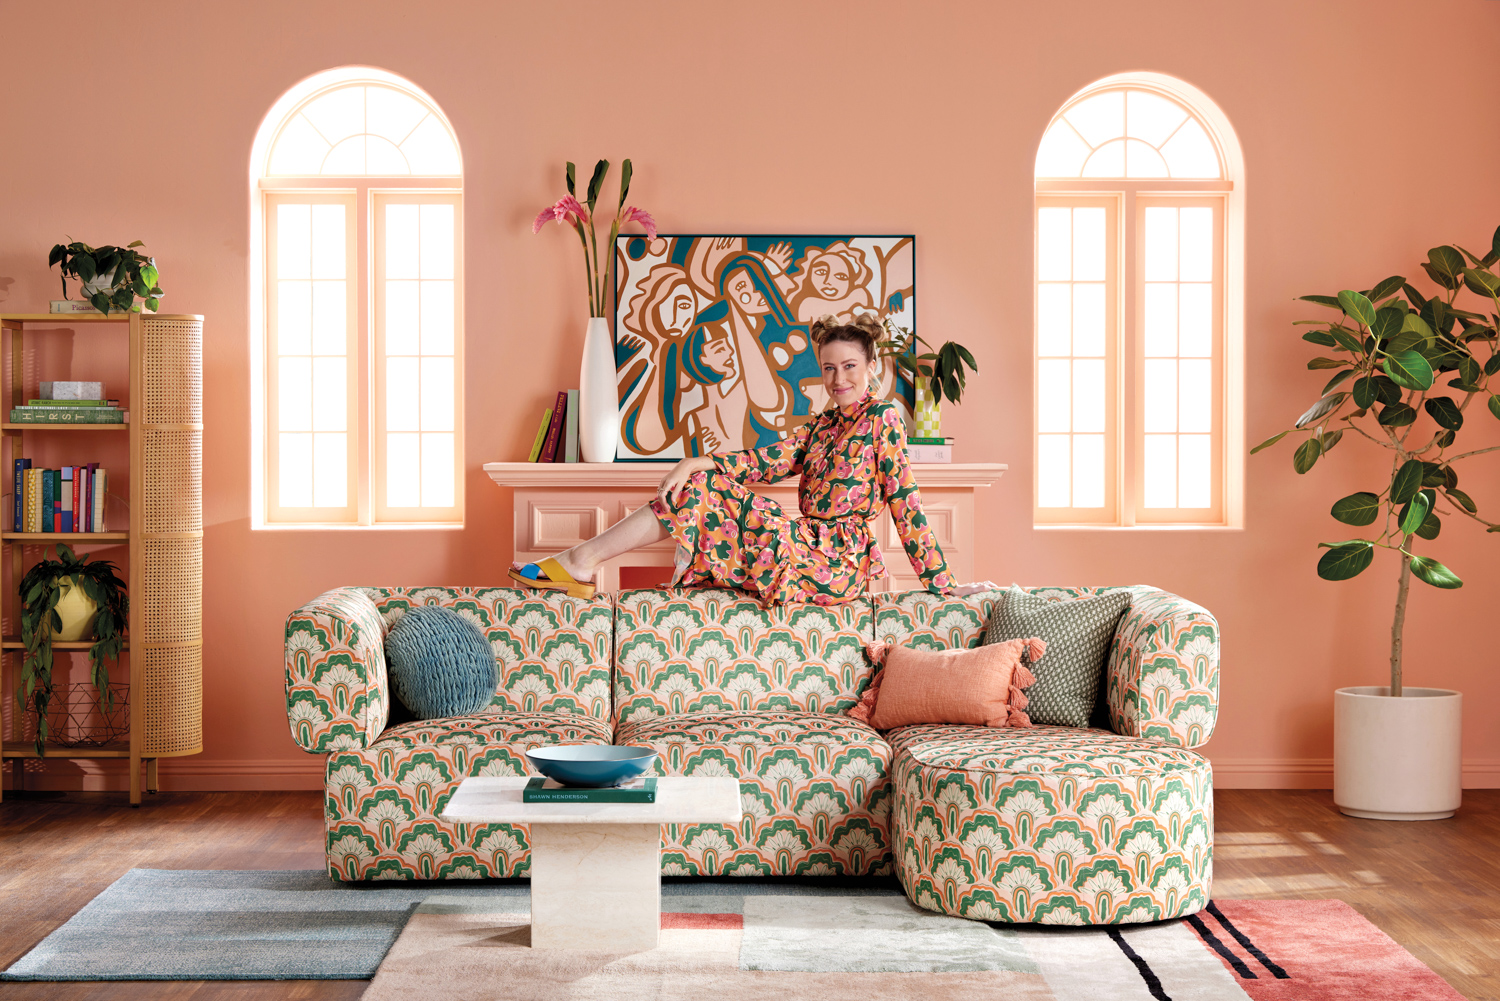 Dani Dazey sitting on a patterned couch in a living room with peach-colored walls and large artwork